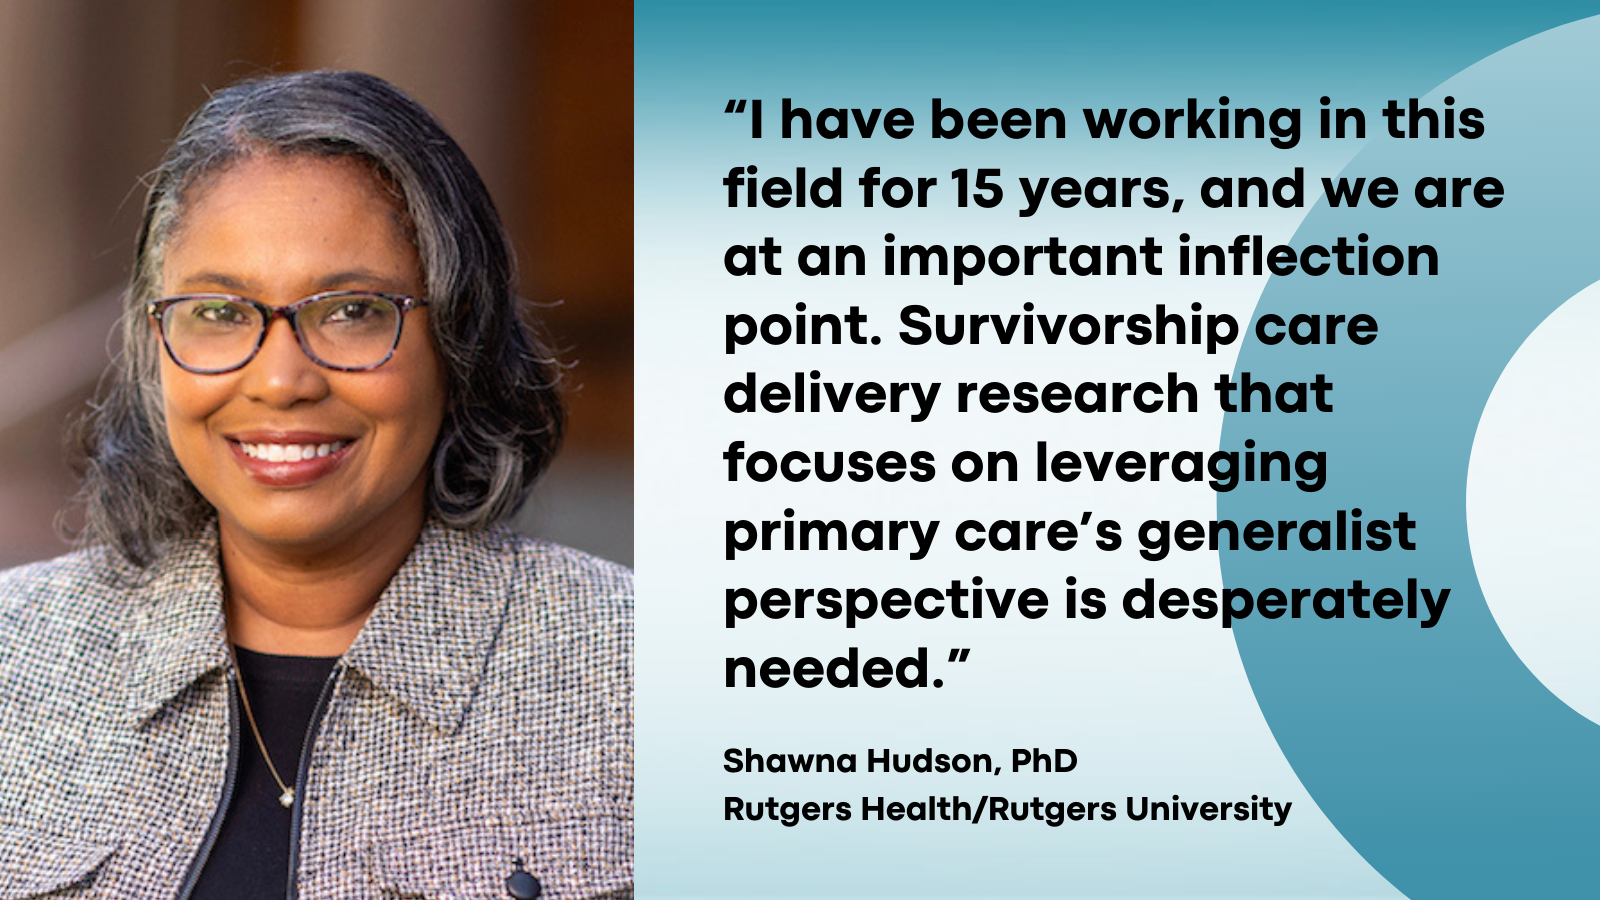 Quote 2. I have been working in this field for 15 years, and we are at an important inflection point. Suvivorship care delivery research that focuses on leveraging primary care's generalist perspective is desperately needed. Shawna Hudson, PhD, Rutgers Health/Rutgers University.